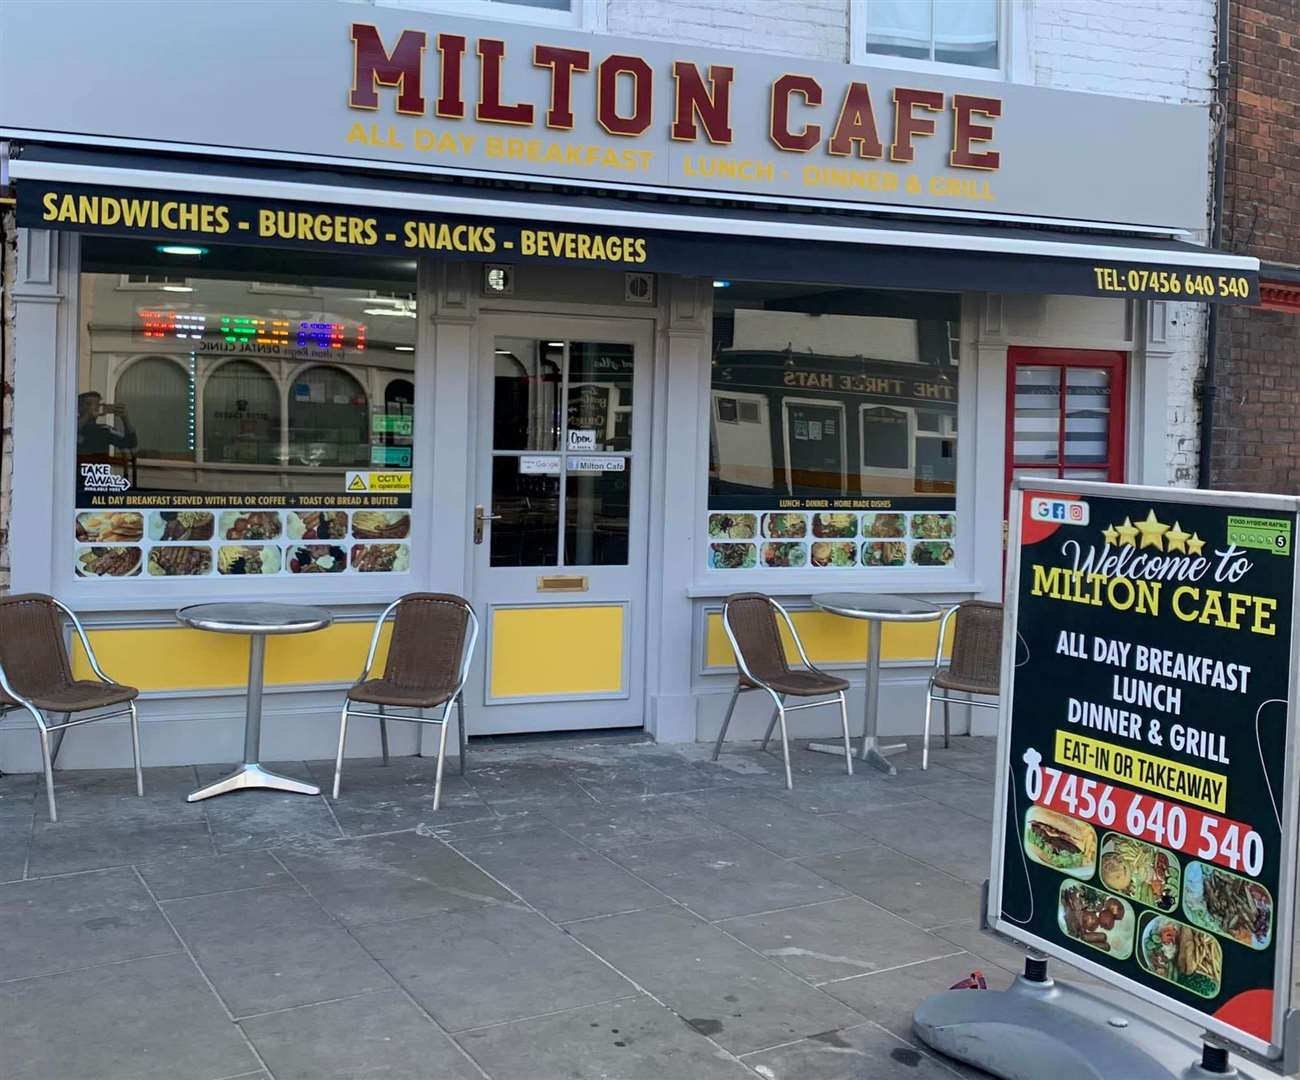 Reviews of Milton Cafe praise the great food and service. Picture: Milton Cafe